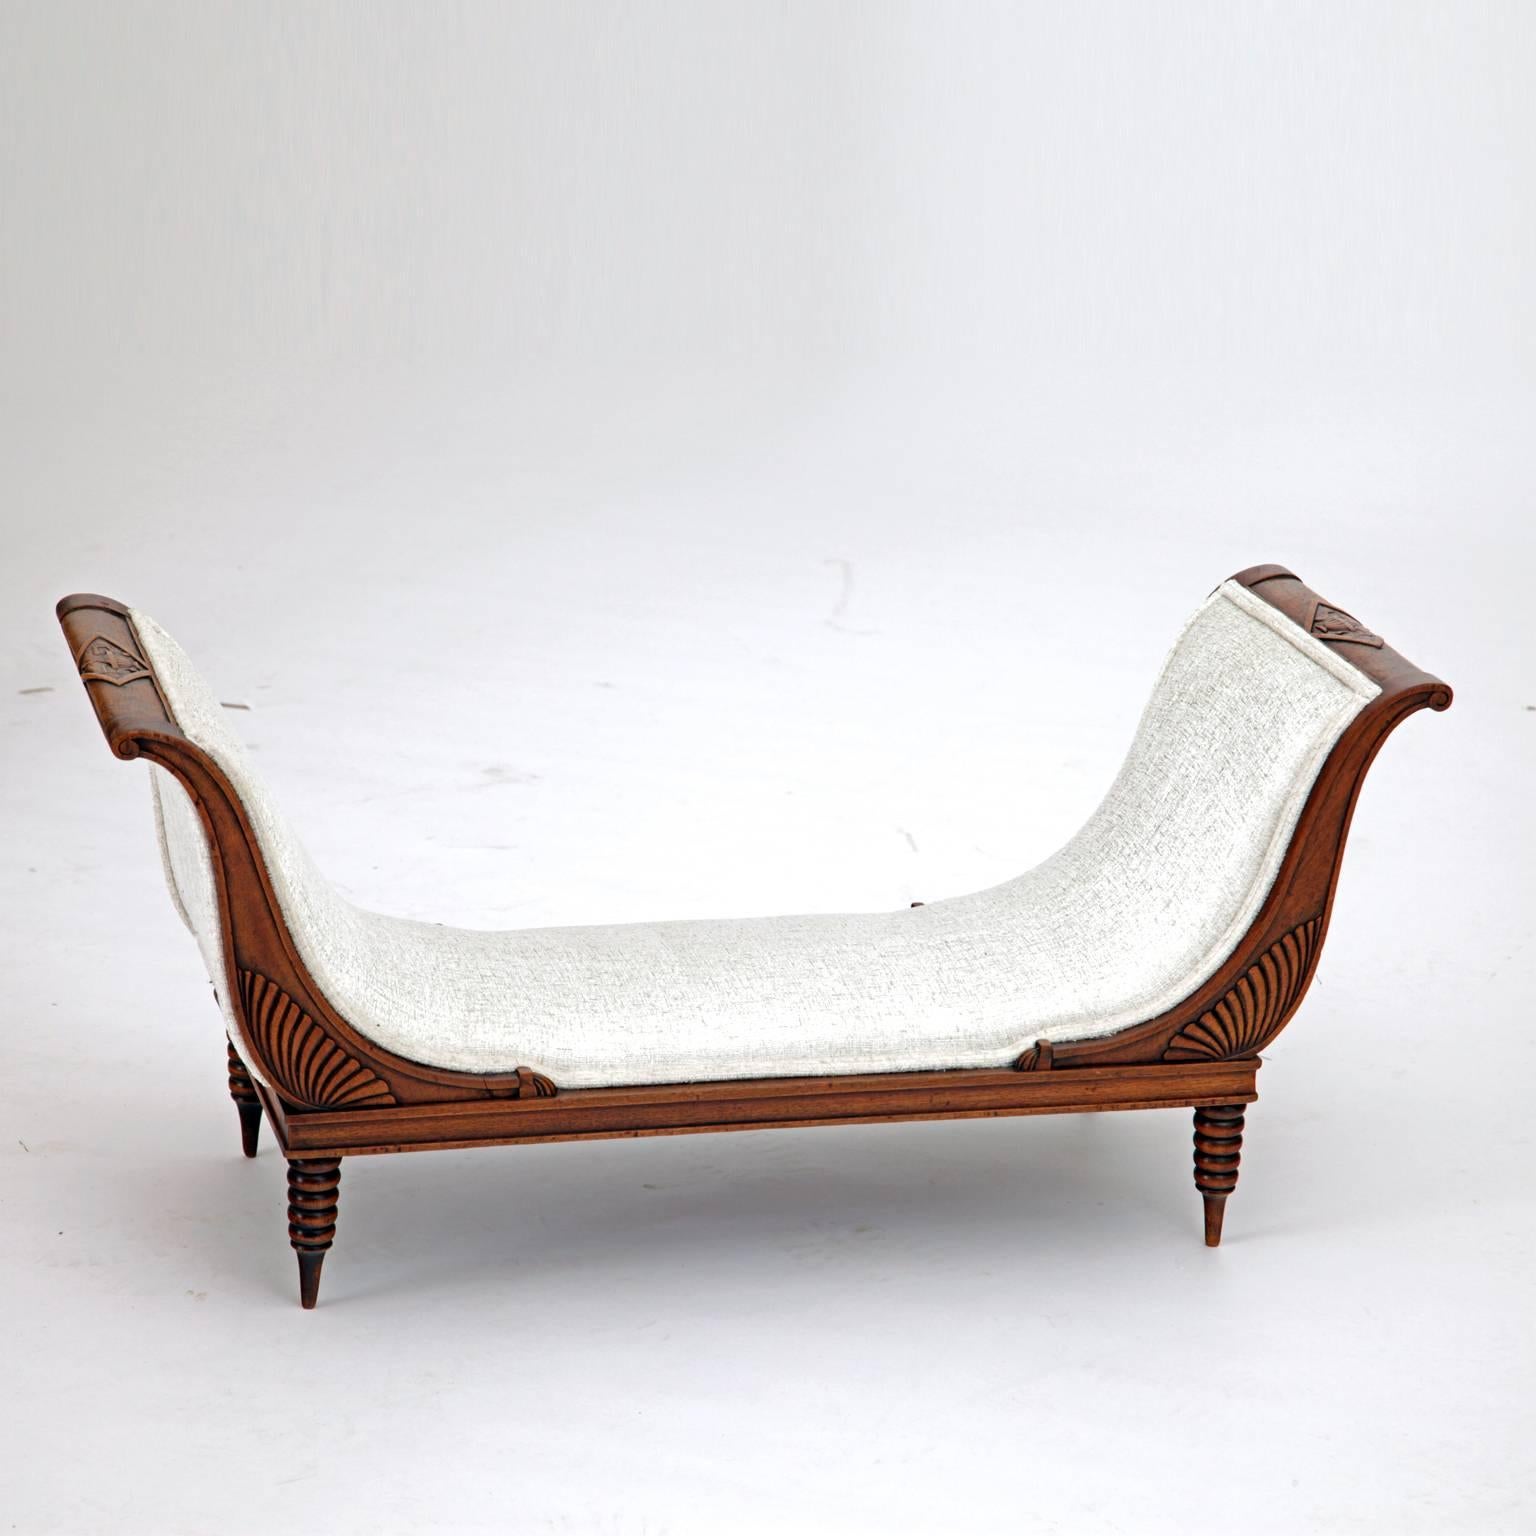 Extraordinary miniature bench with sled-shaped sides and carved urn-motives. The bench is newly upholstered with a high quality silver-white fabric.